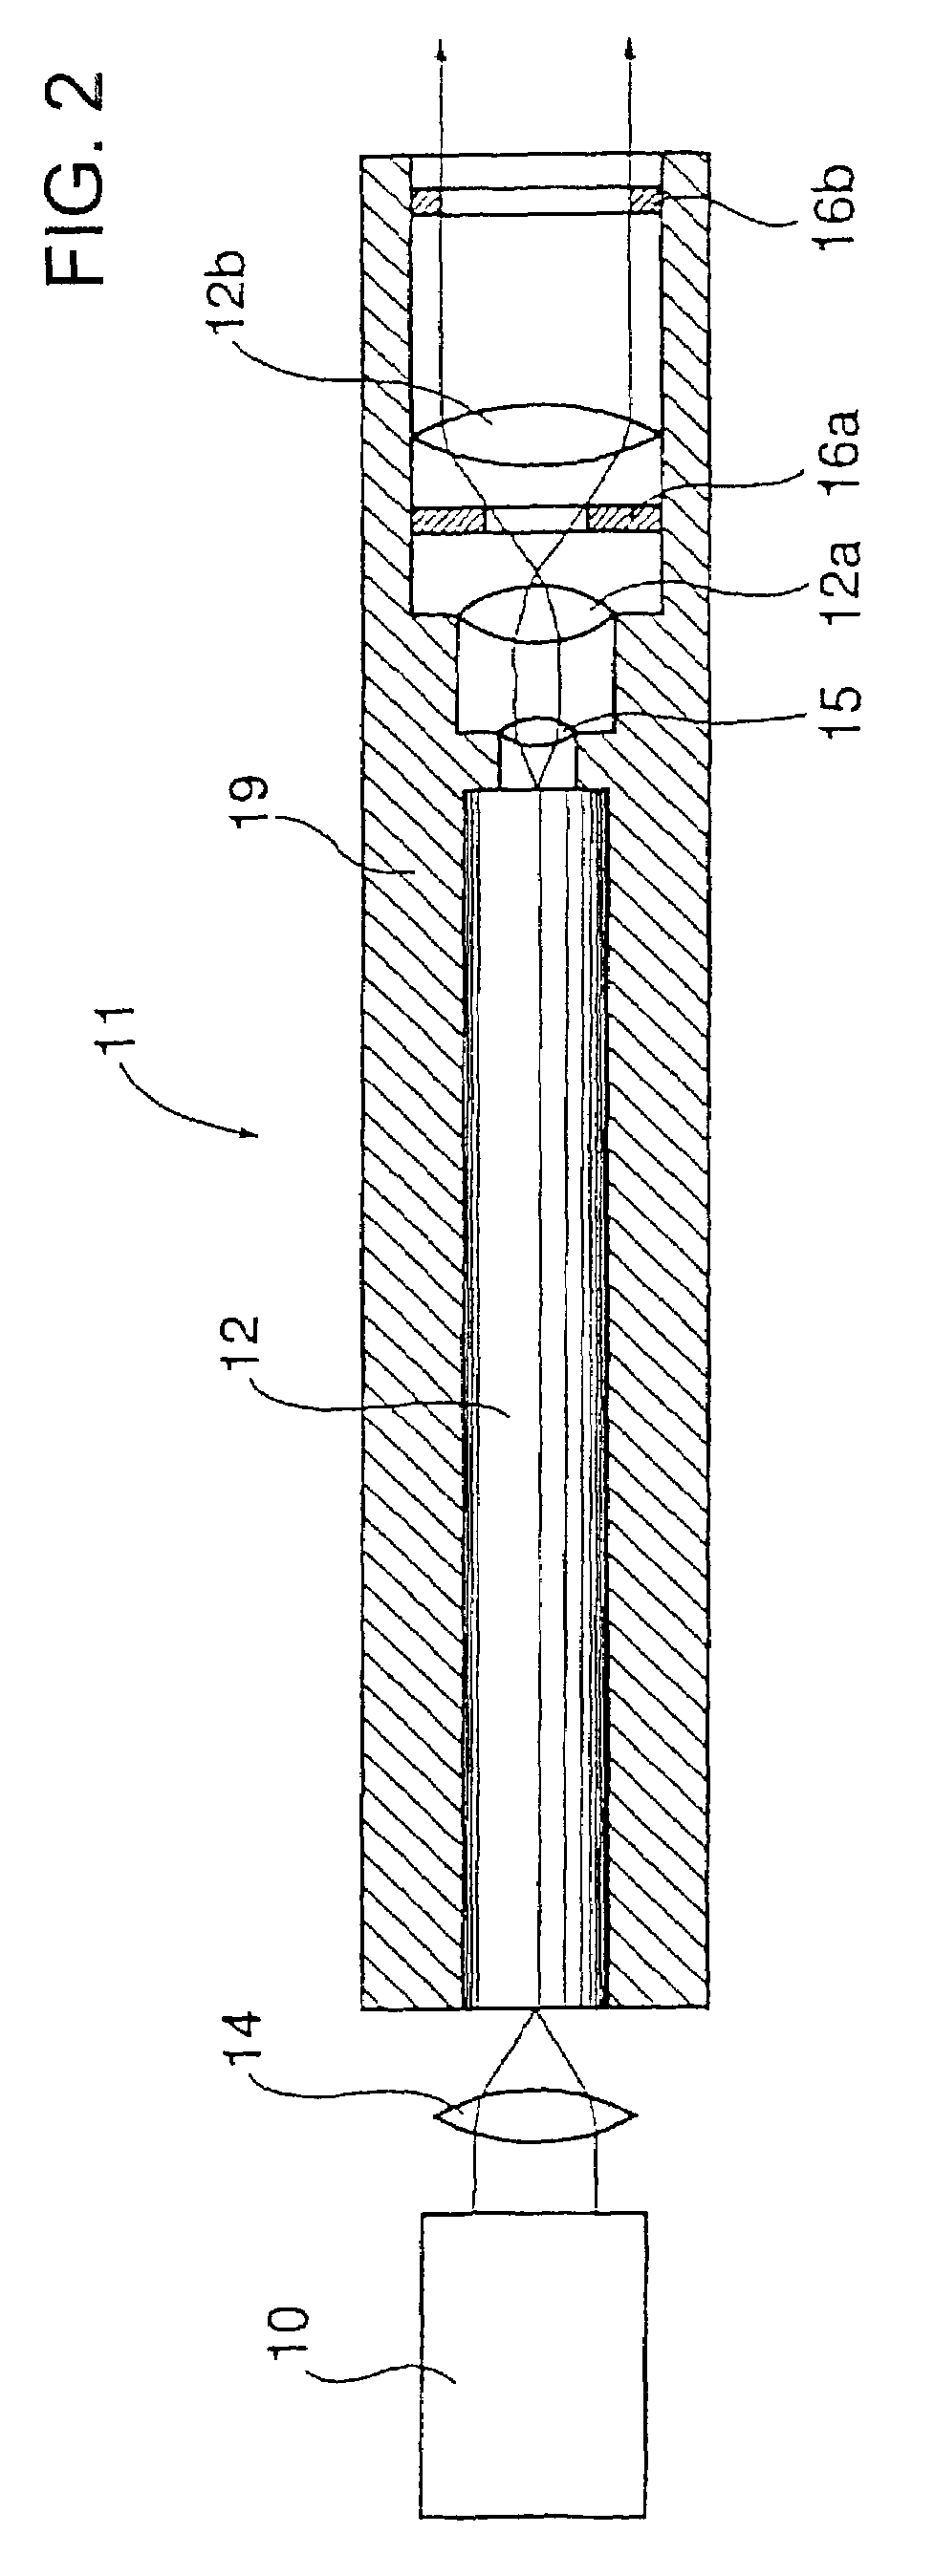 Apparatus and method for measuring particle size